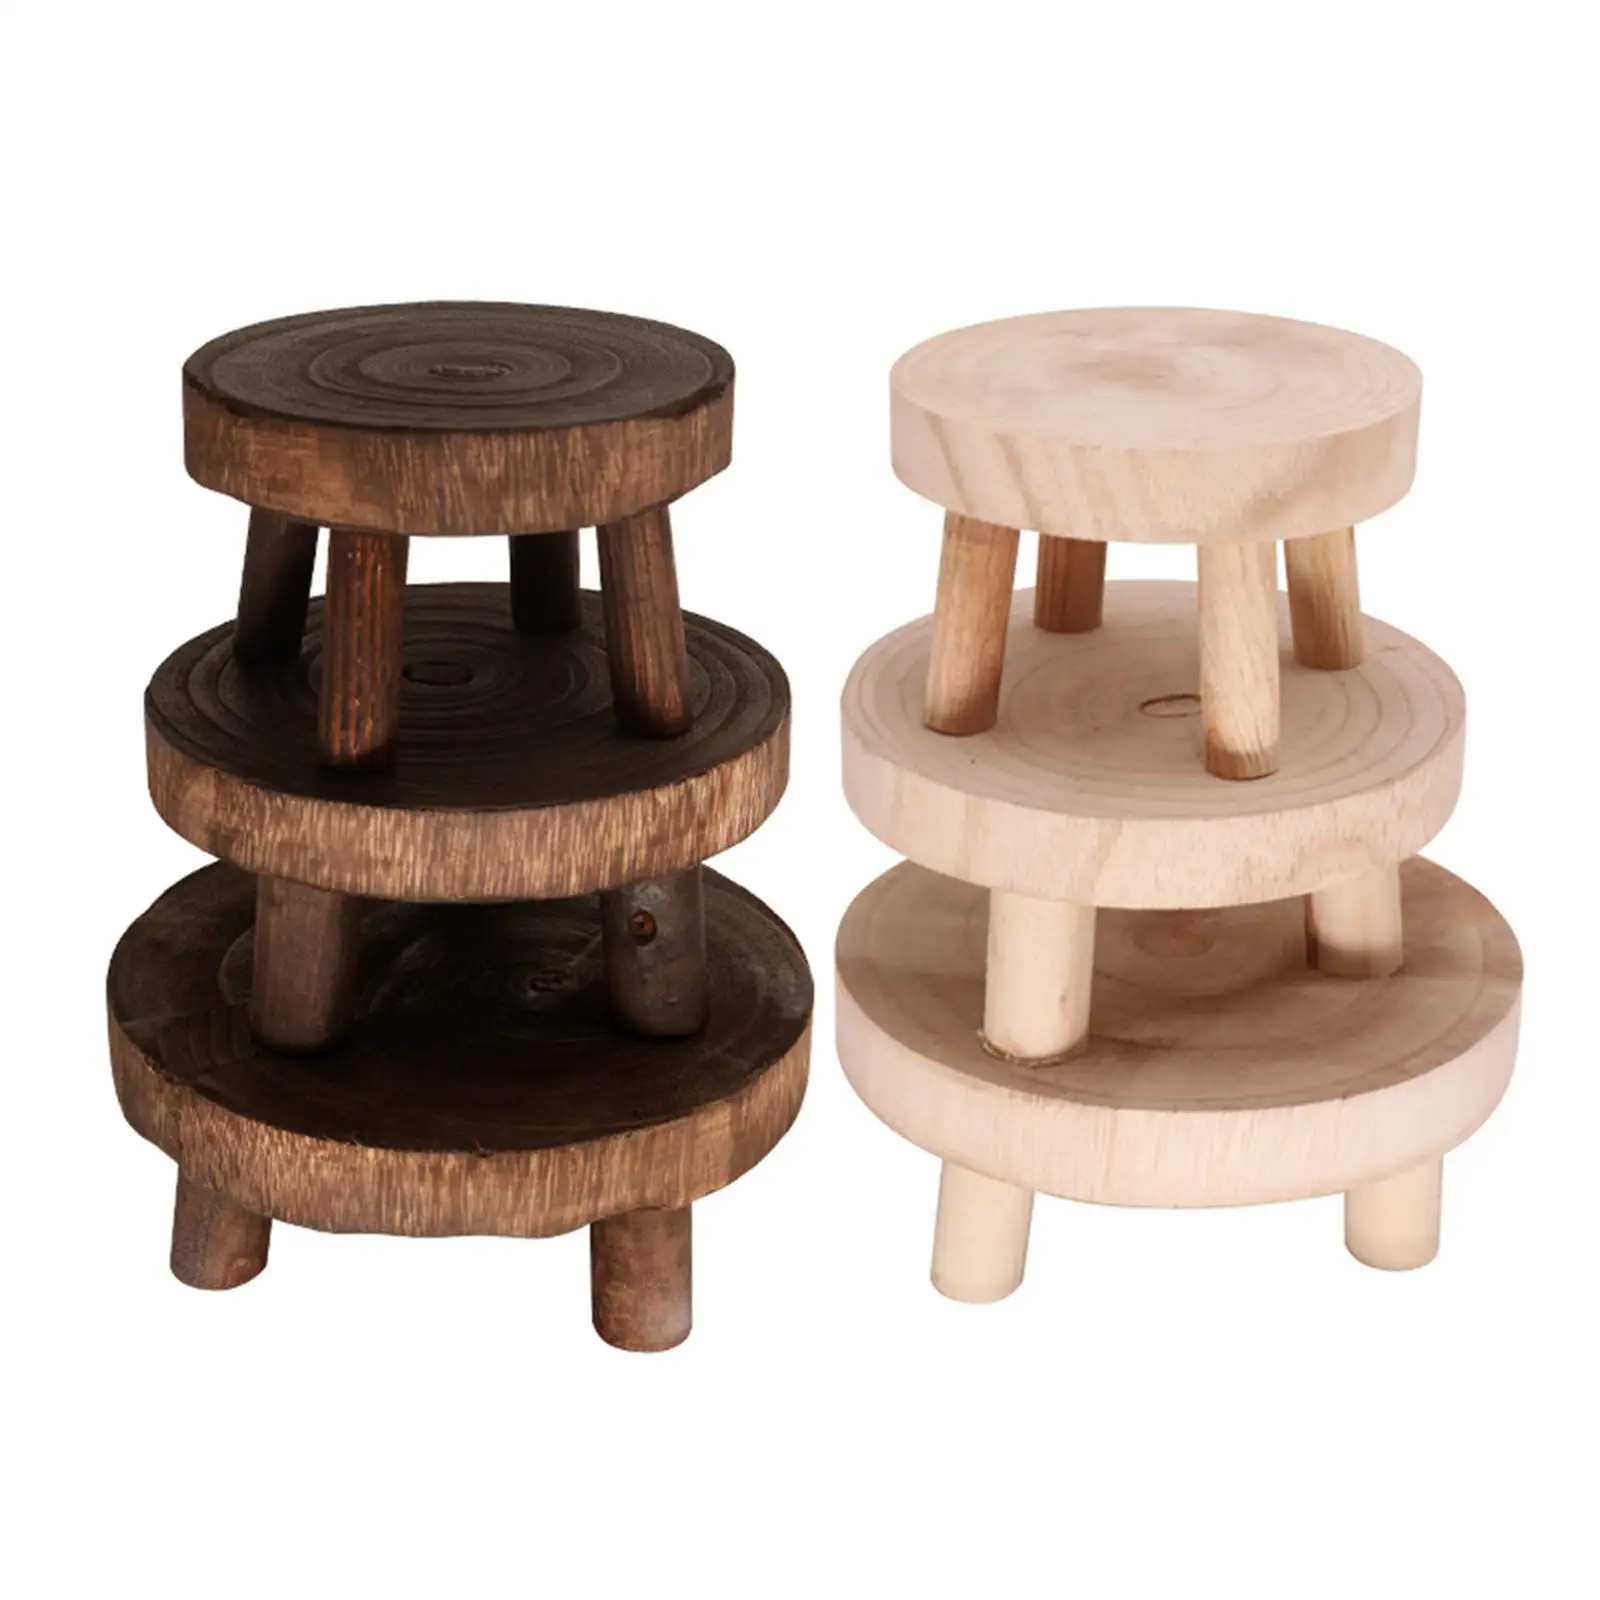 Solid Wood Compact Flowerpot Stand Solid Wood Stool Base Garden Decoration for Balcony Lawn Home Garden Patio Corridor Plants